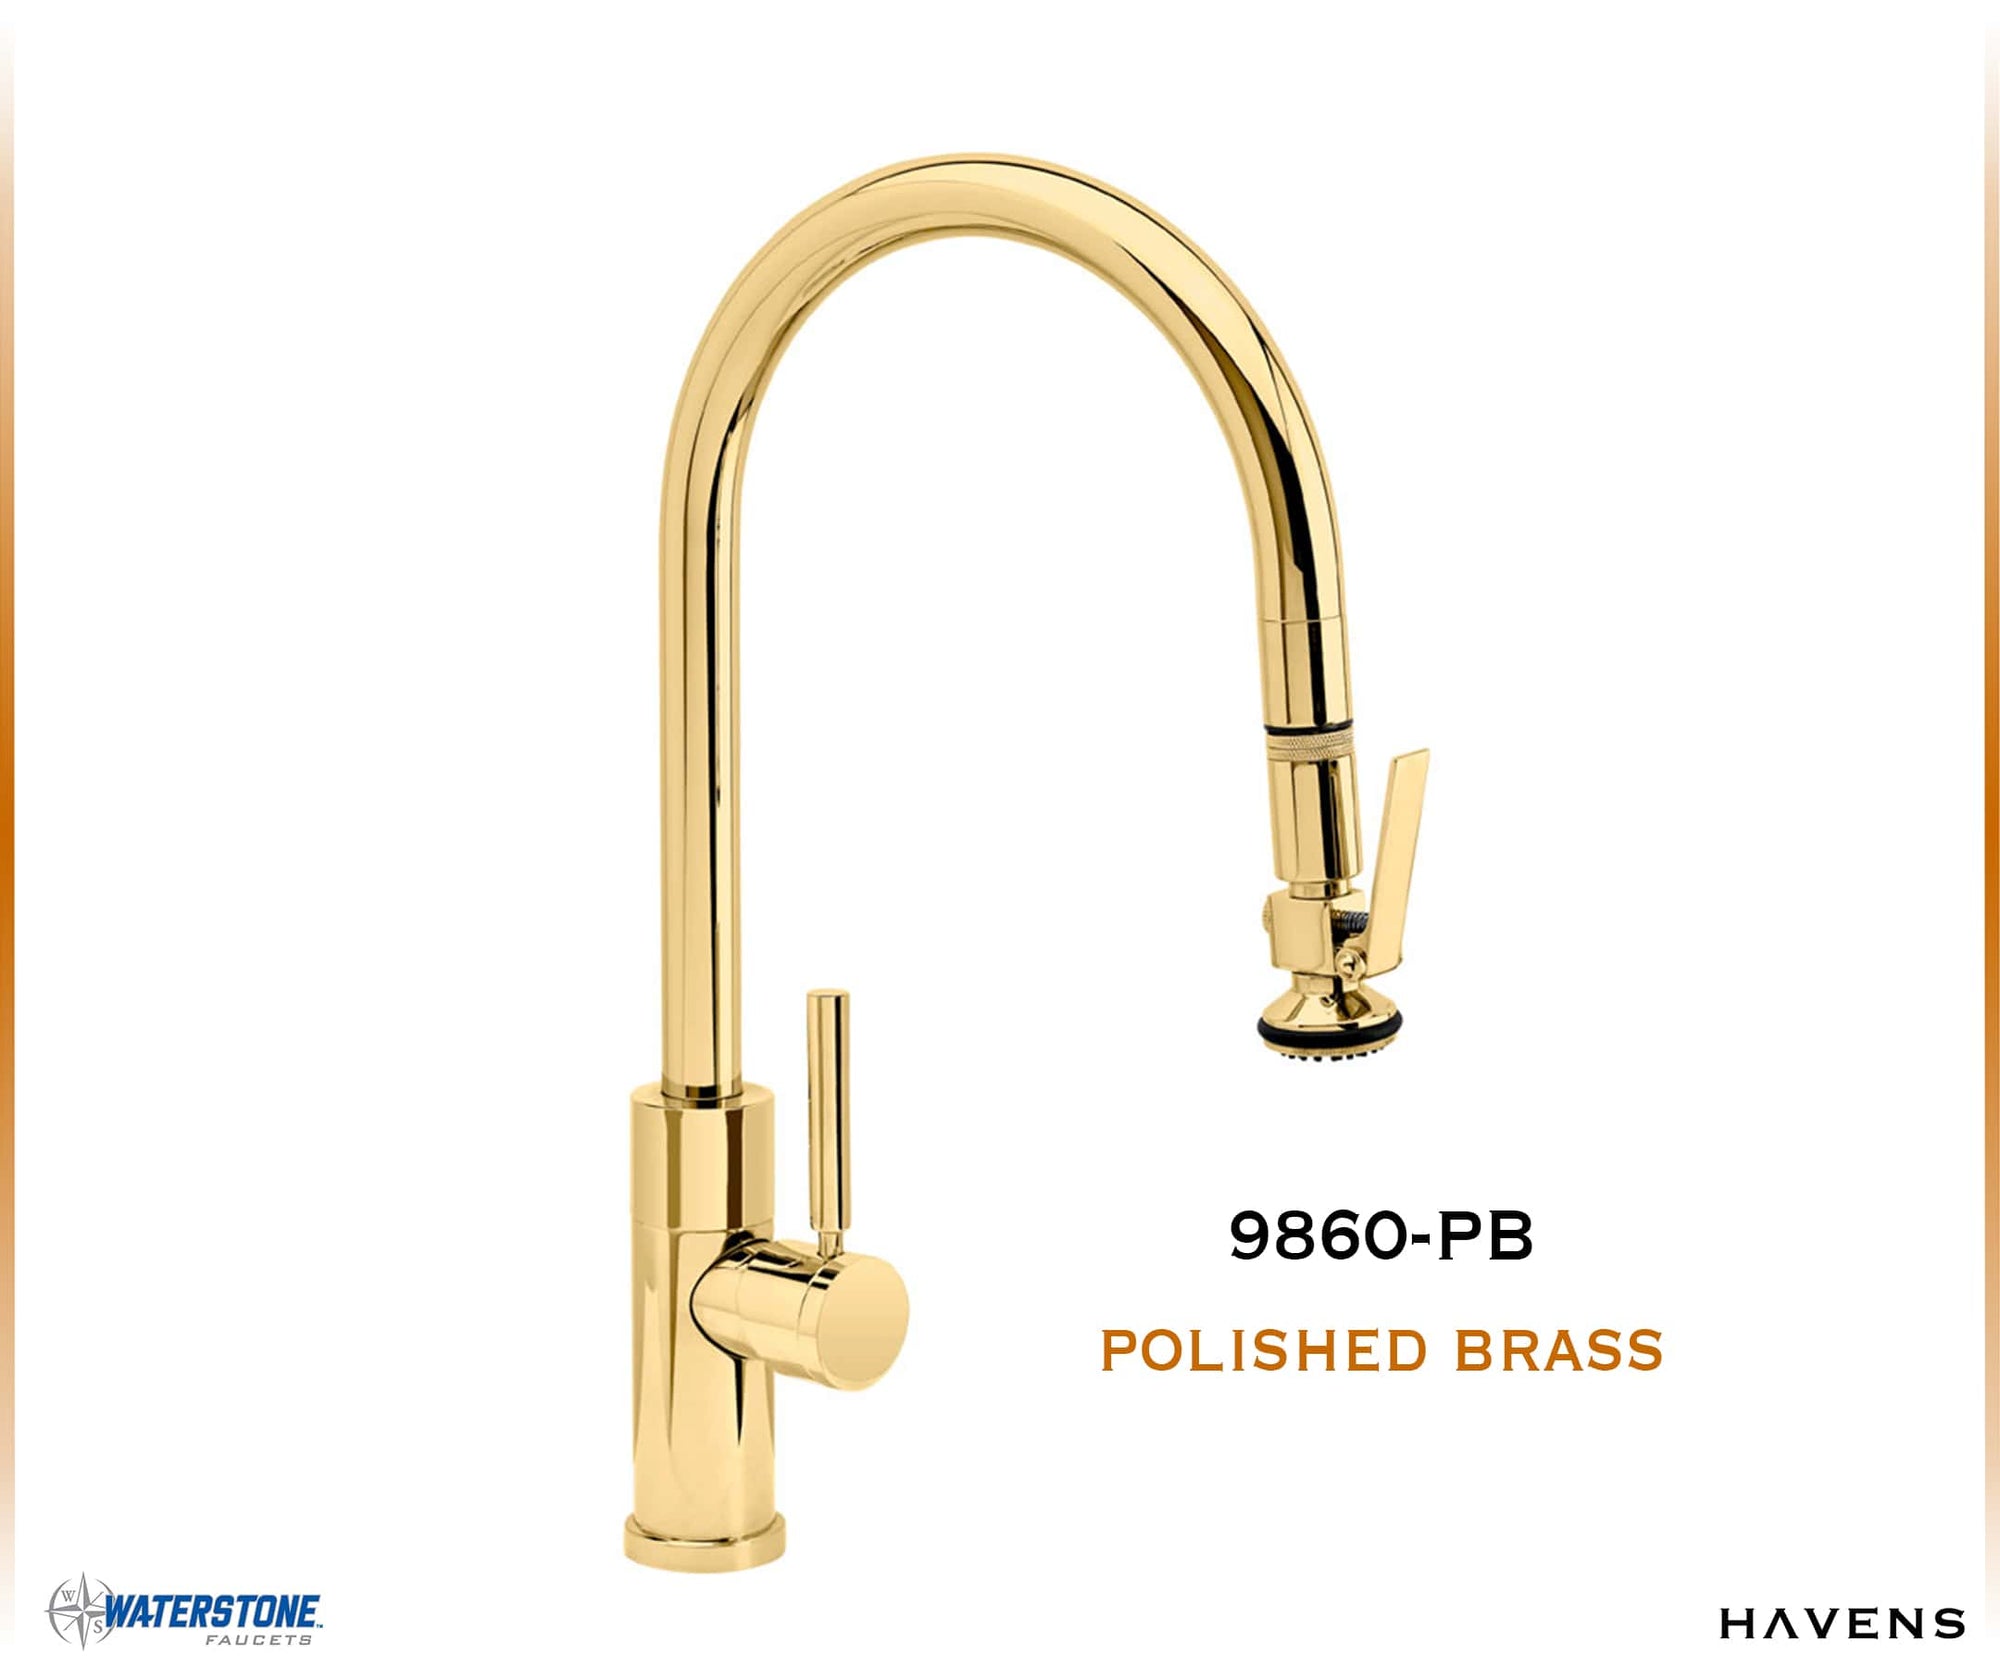 Waterstone Modern PLP Angled Pulldown Faucet - 9860